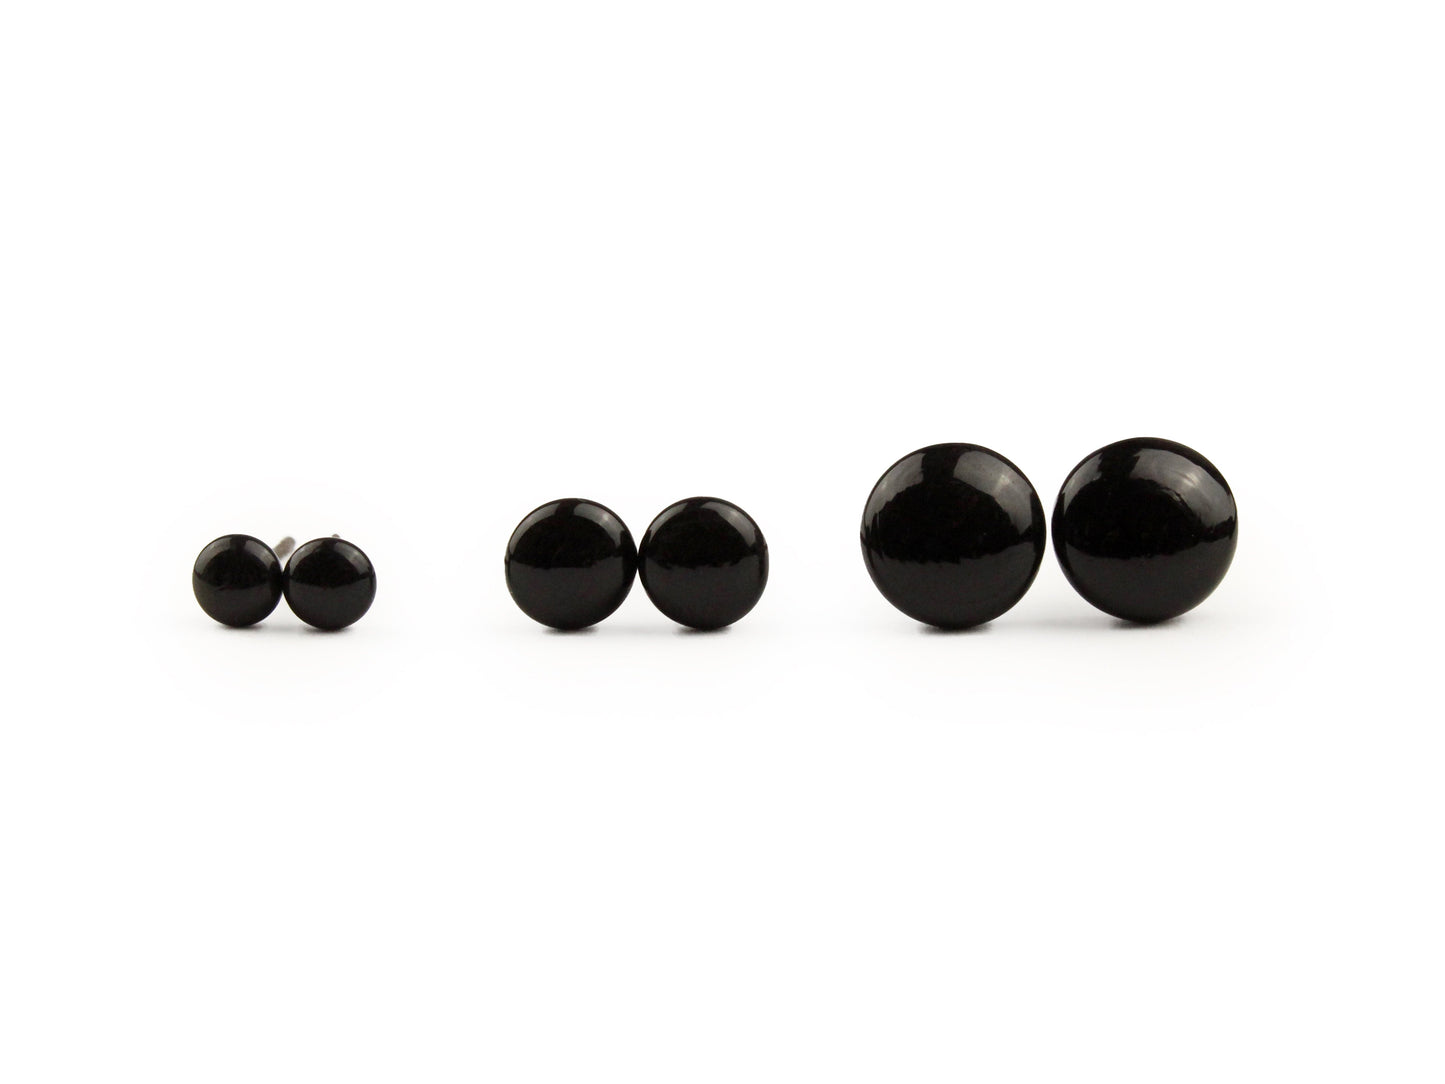 Black Easy Glue-In Glass Eyes 3 - 9 mm options - The Makerss